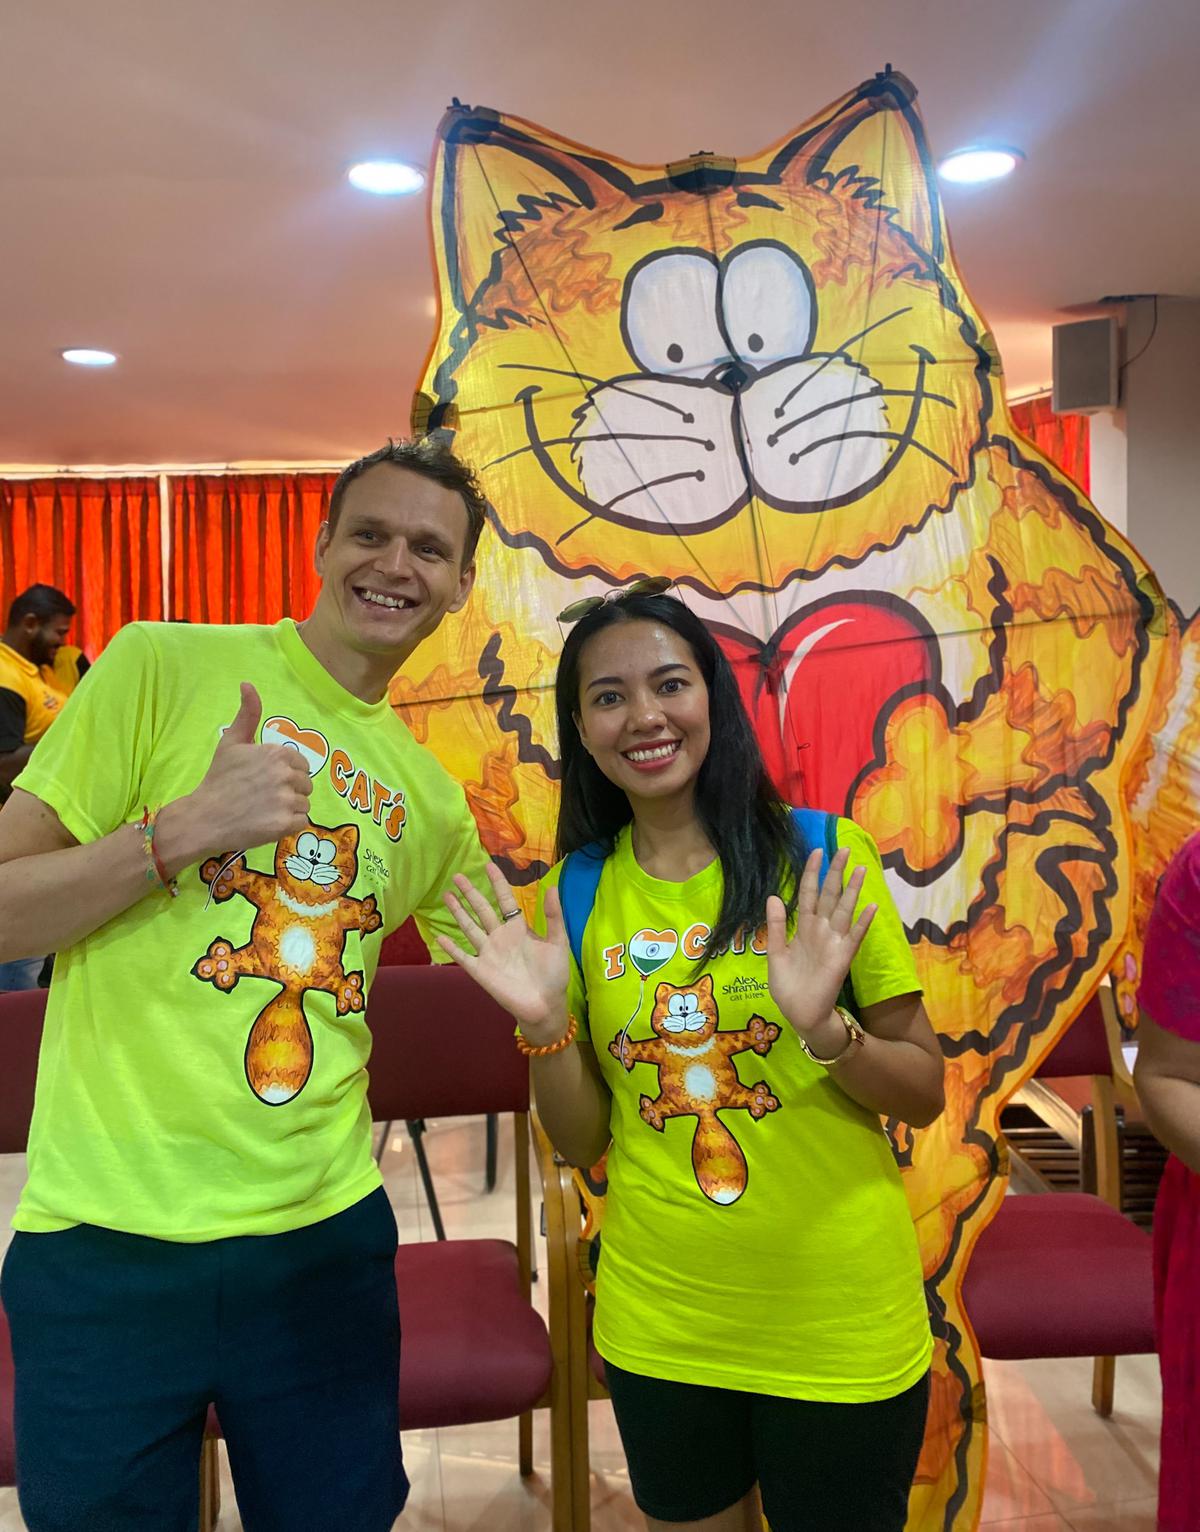 Alex of Ukraine and Nee of Thailand, representing Cat Kites, with the flat cat kite, which will be among 10 kites that the couple will be flying during the ONGC MRPL International Kite Festival in Mangaluru.